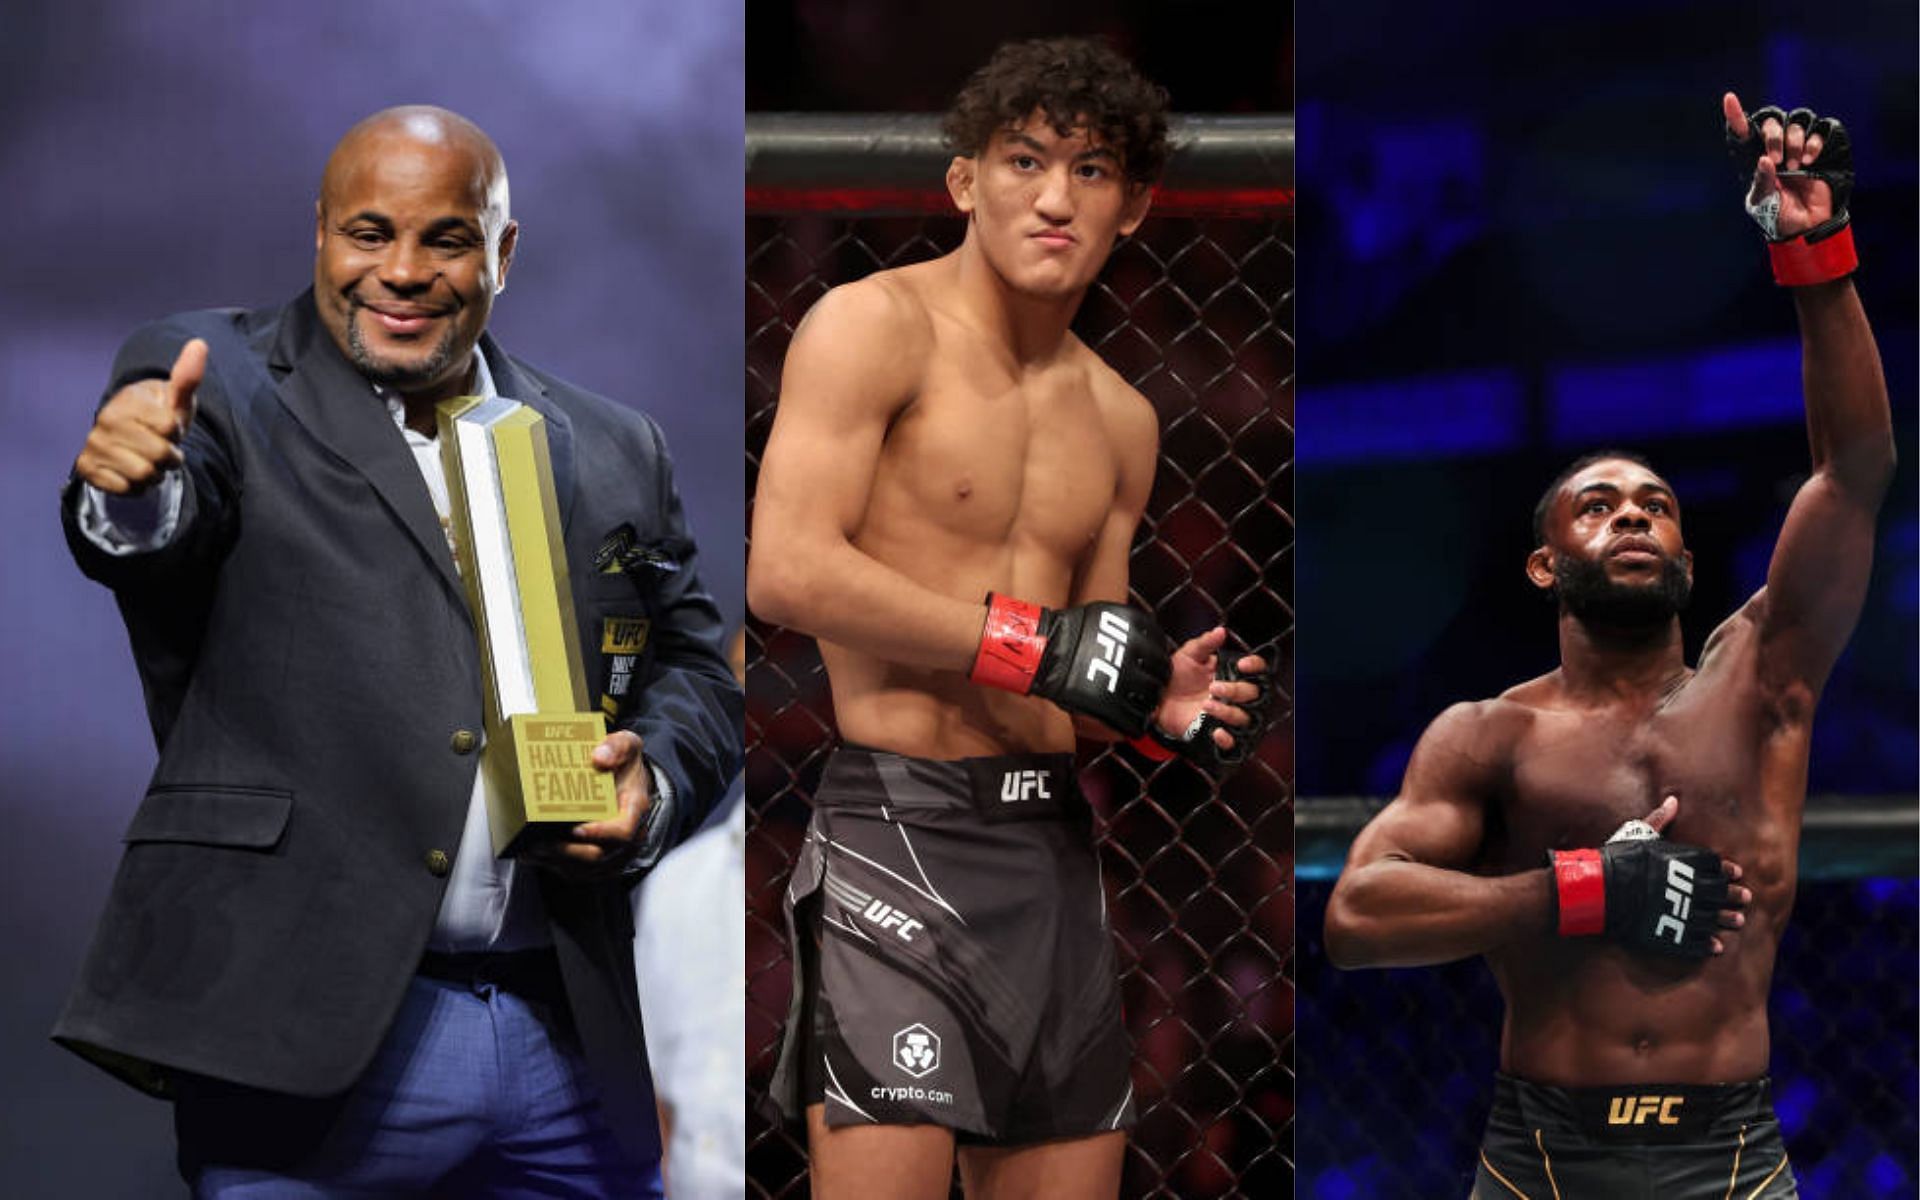 From left to right: Daniel Cormier, Raul Rosas Jr., and Aljamain Sterling